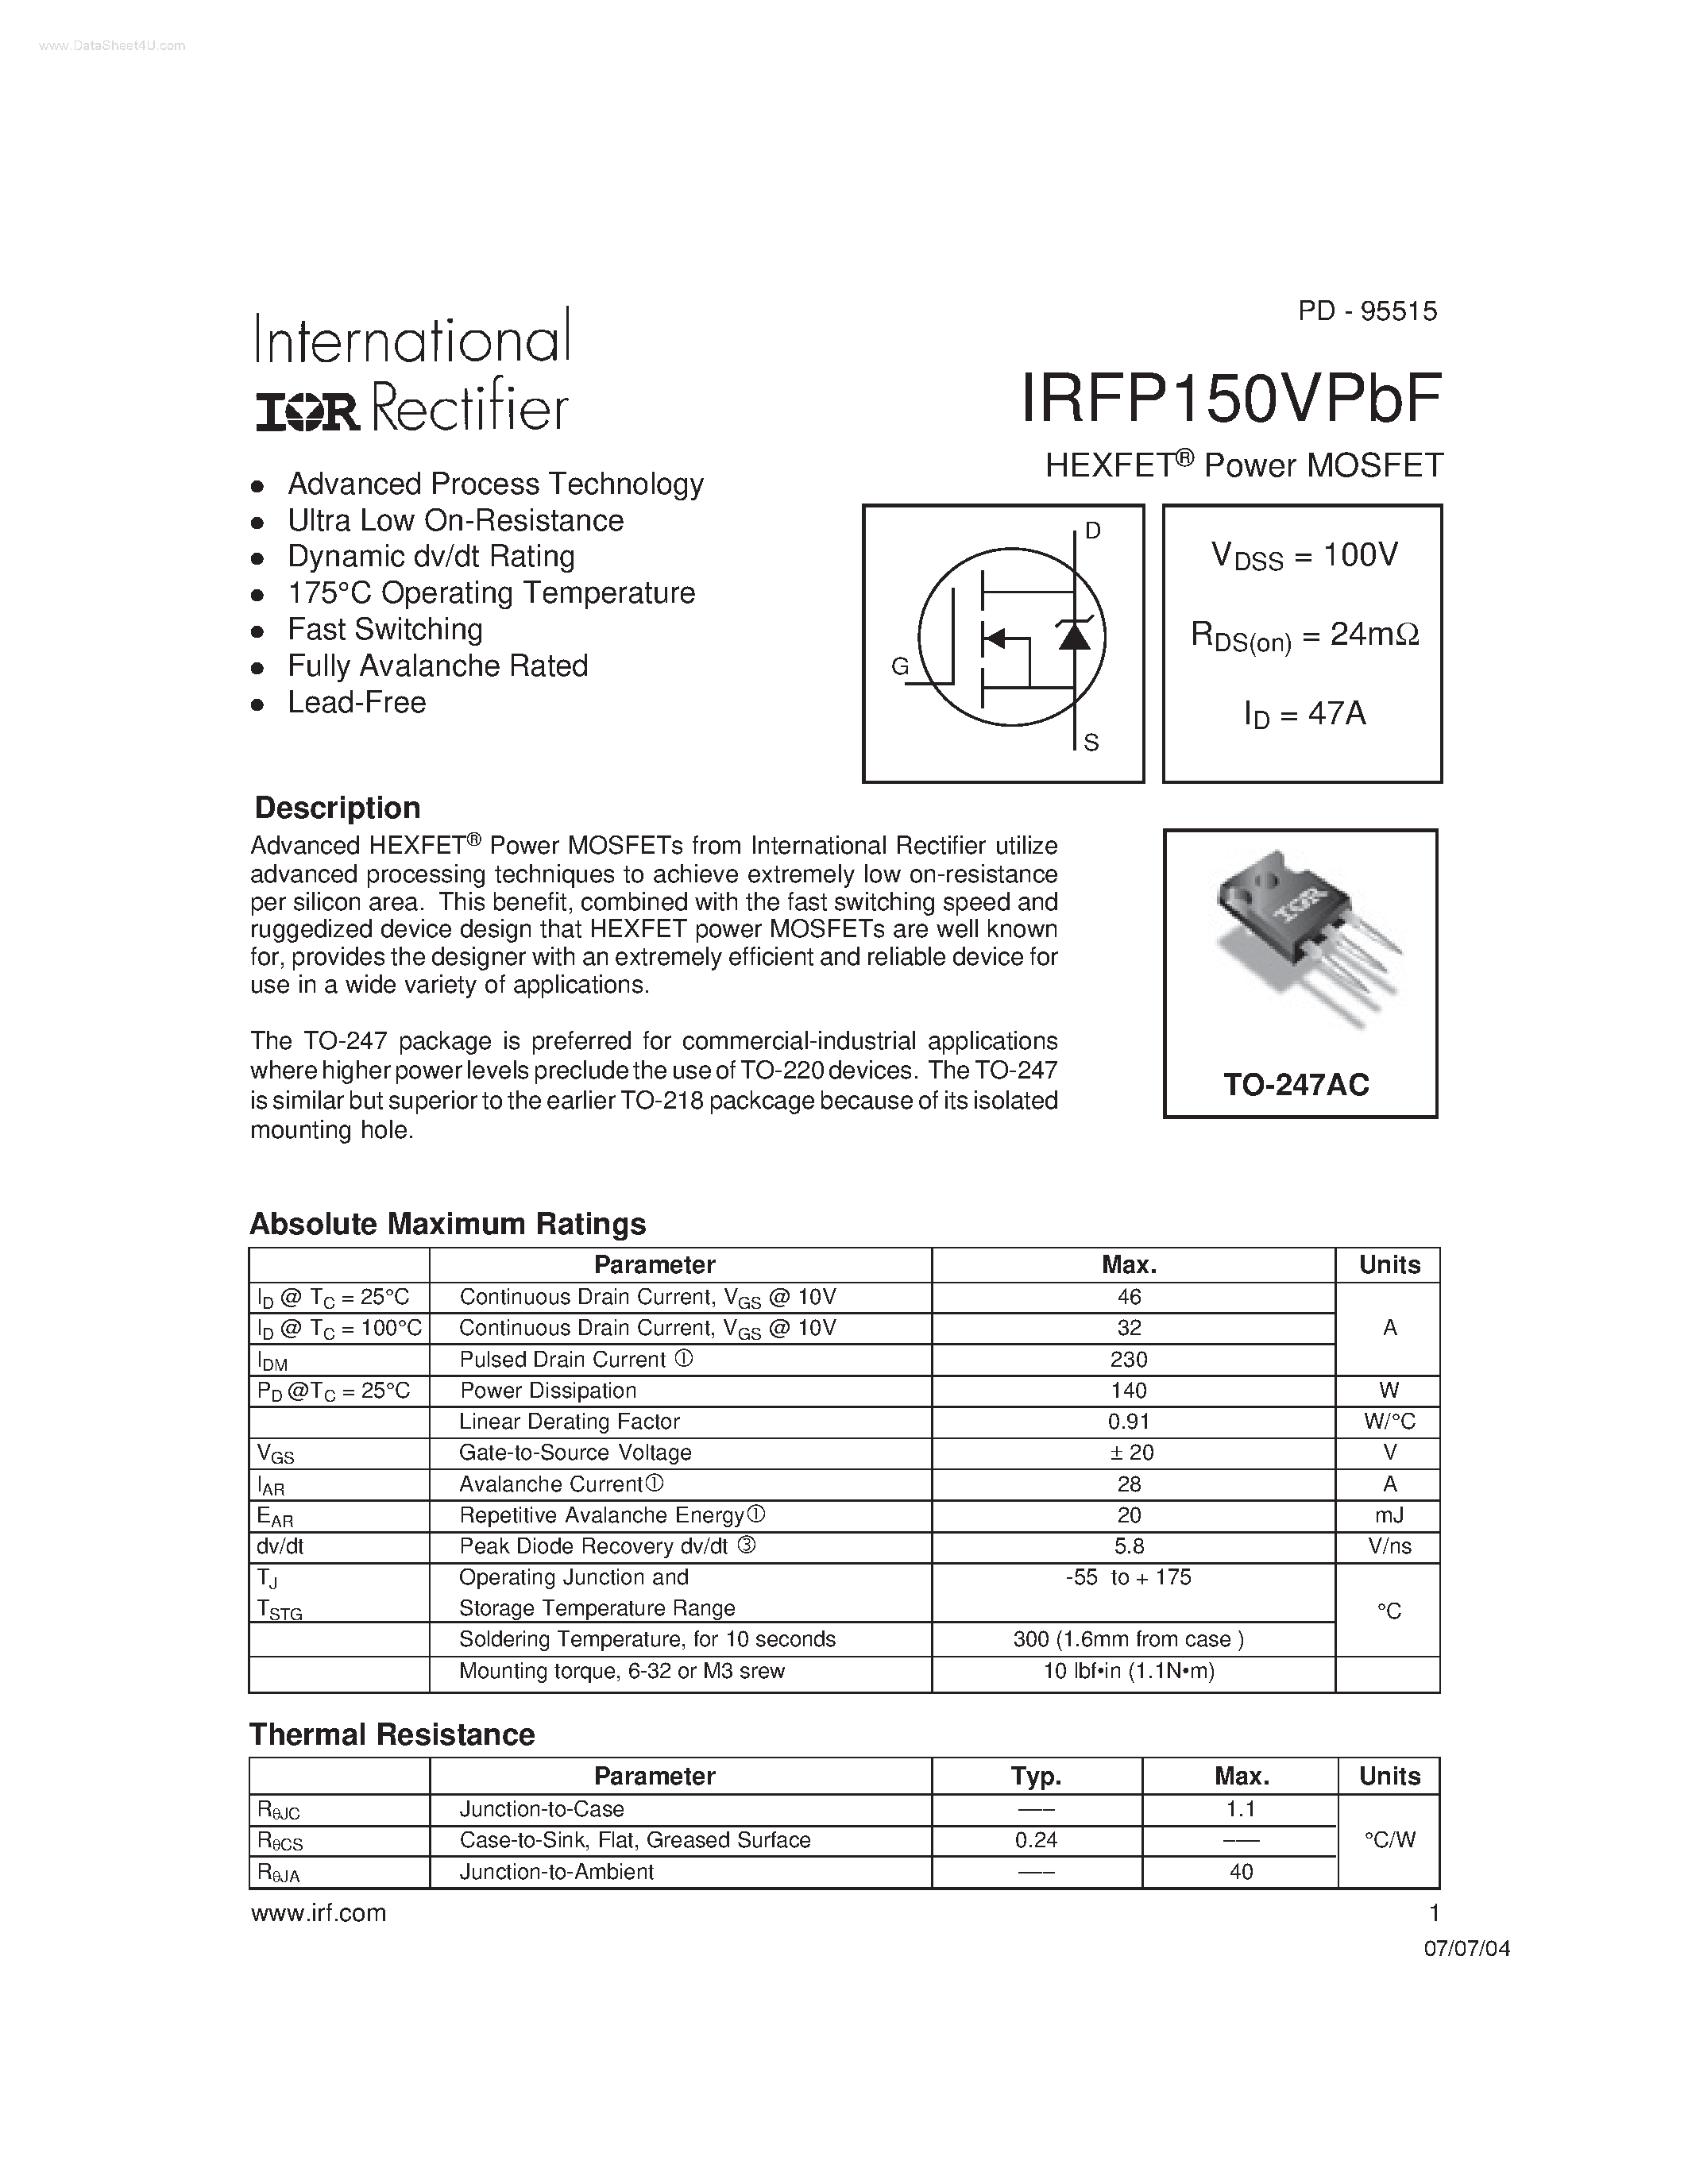 Datasheet IRFP150VPBF - Power MOSFET page 1